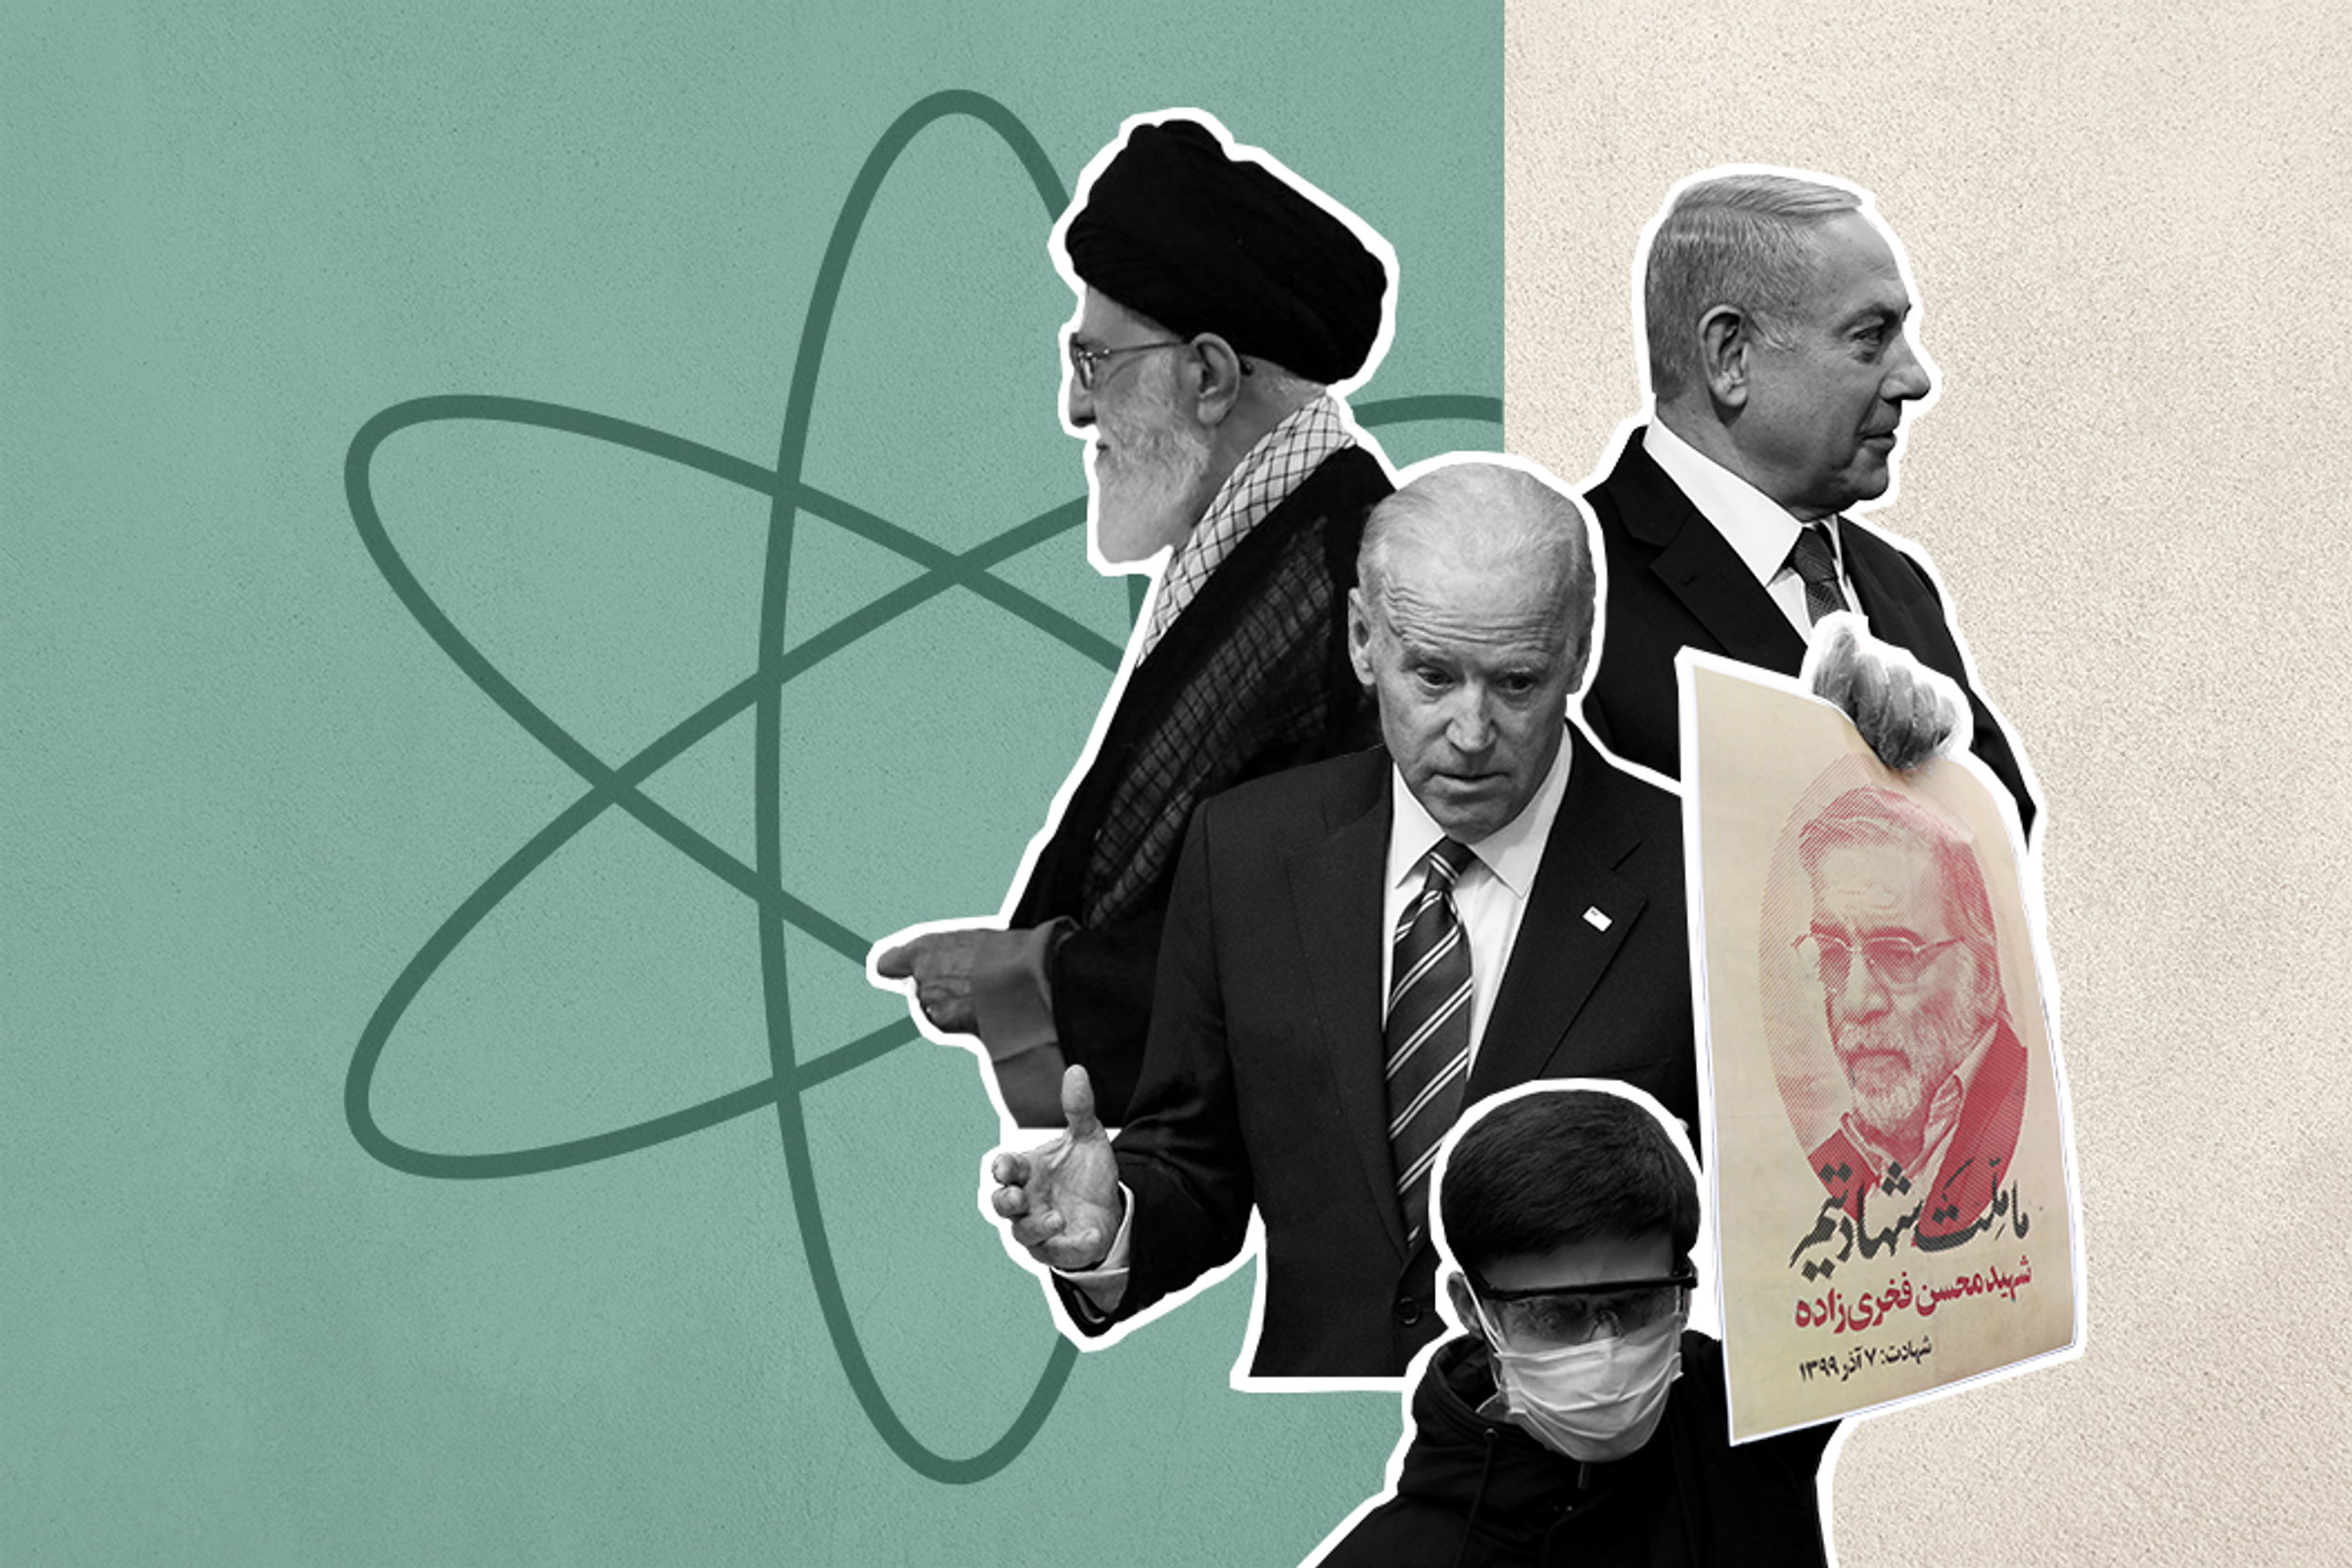 What We’re Watching: Iranian cat cornered on nukes, Italy’s political maneuvers, Asian Americans targeted